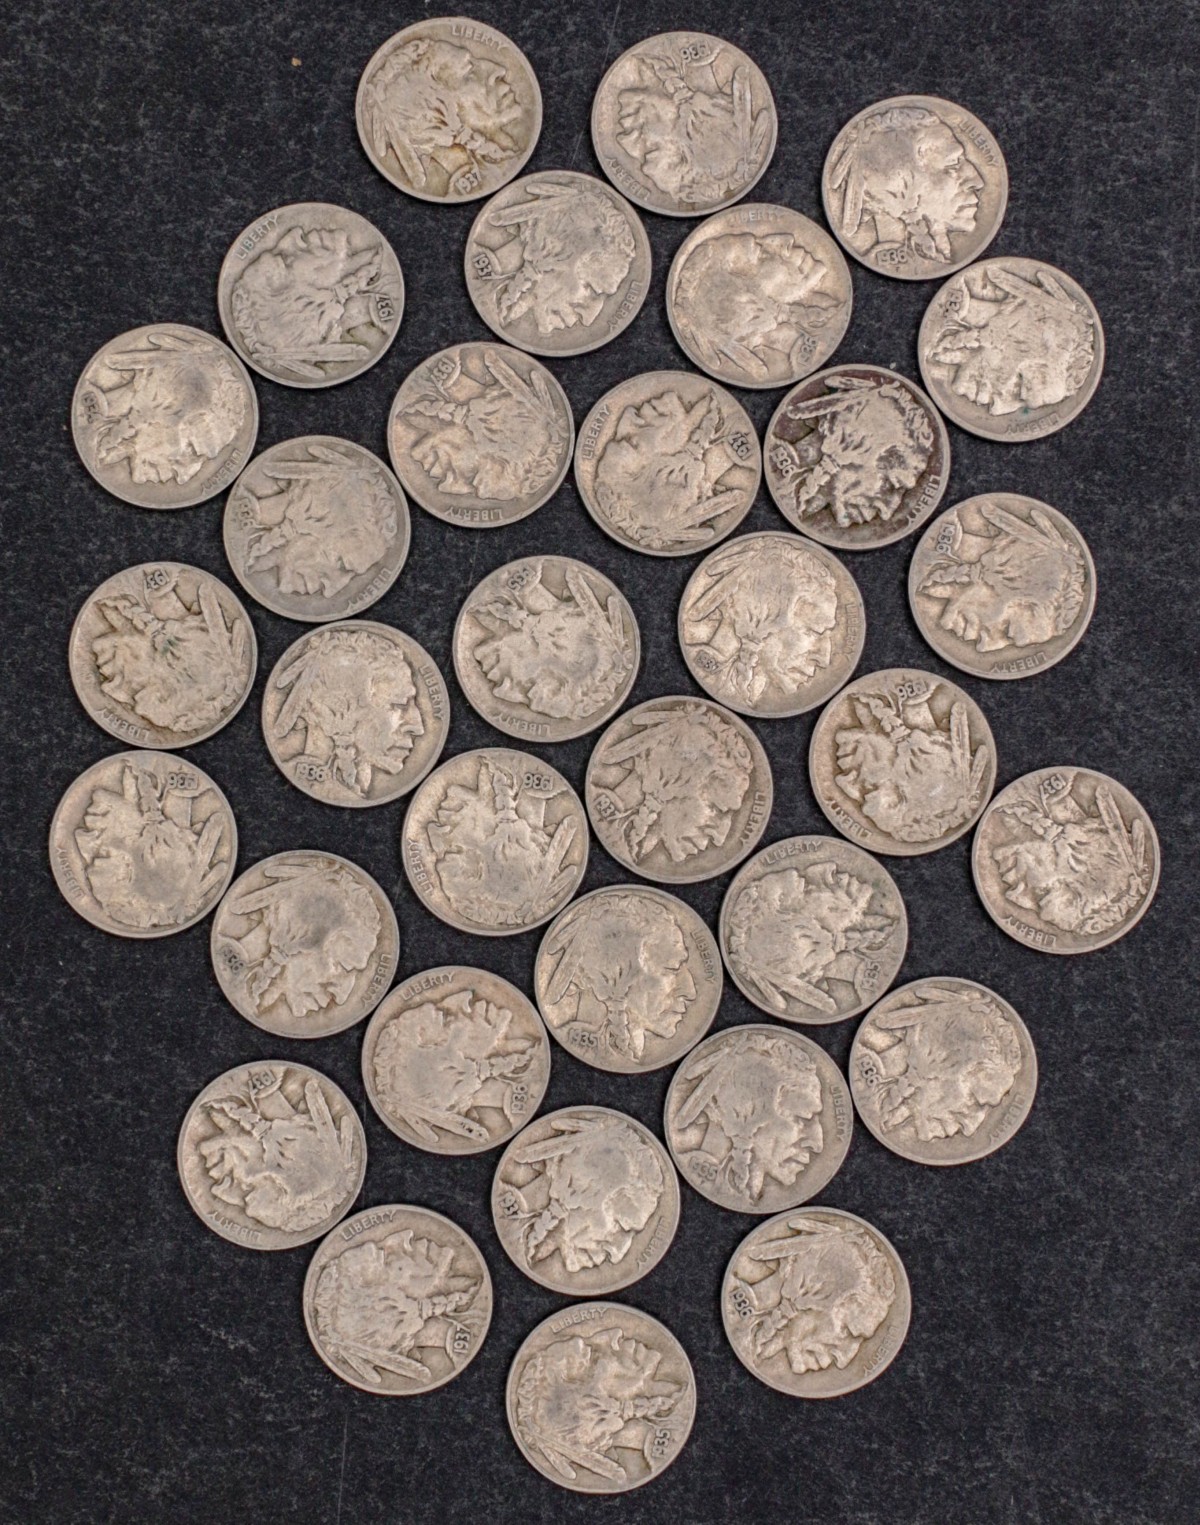 100 BUFFALO NICKELS WITH DATE